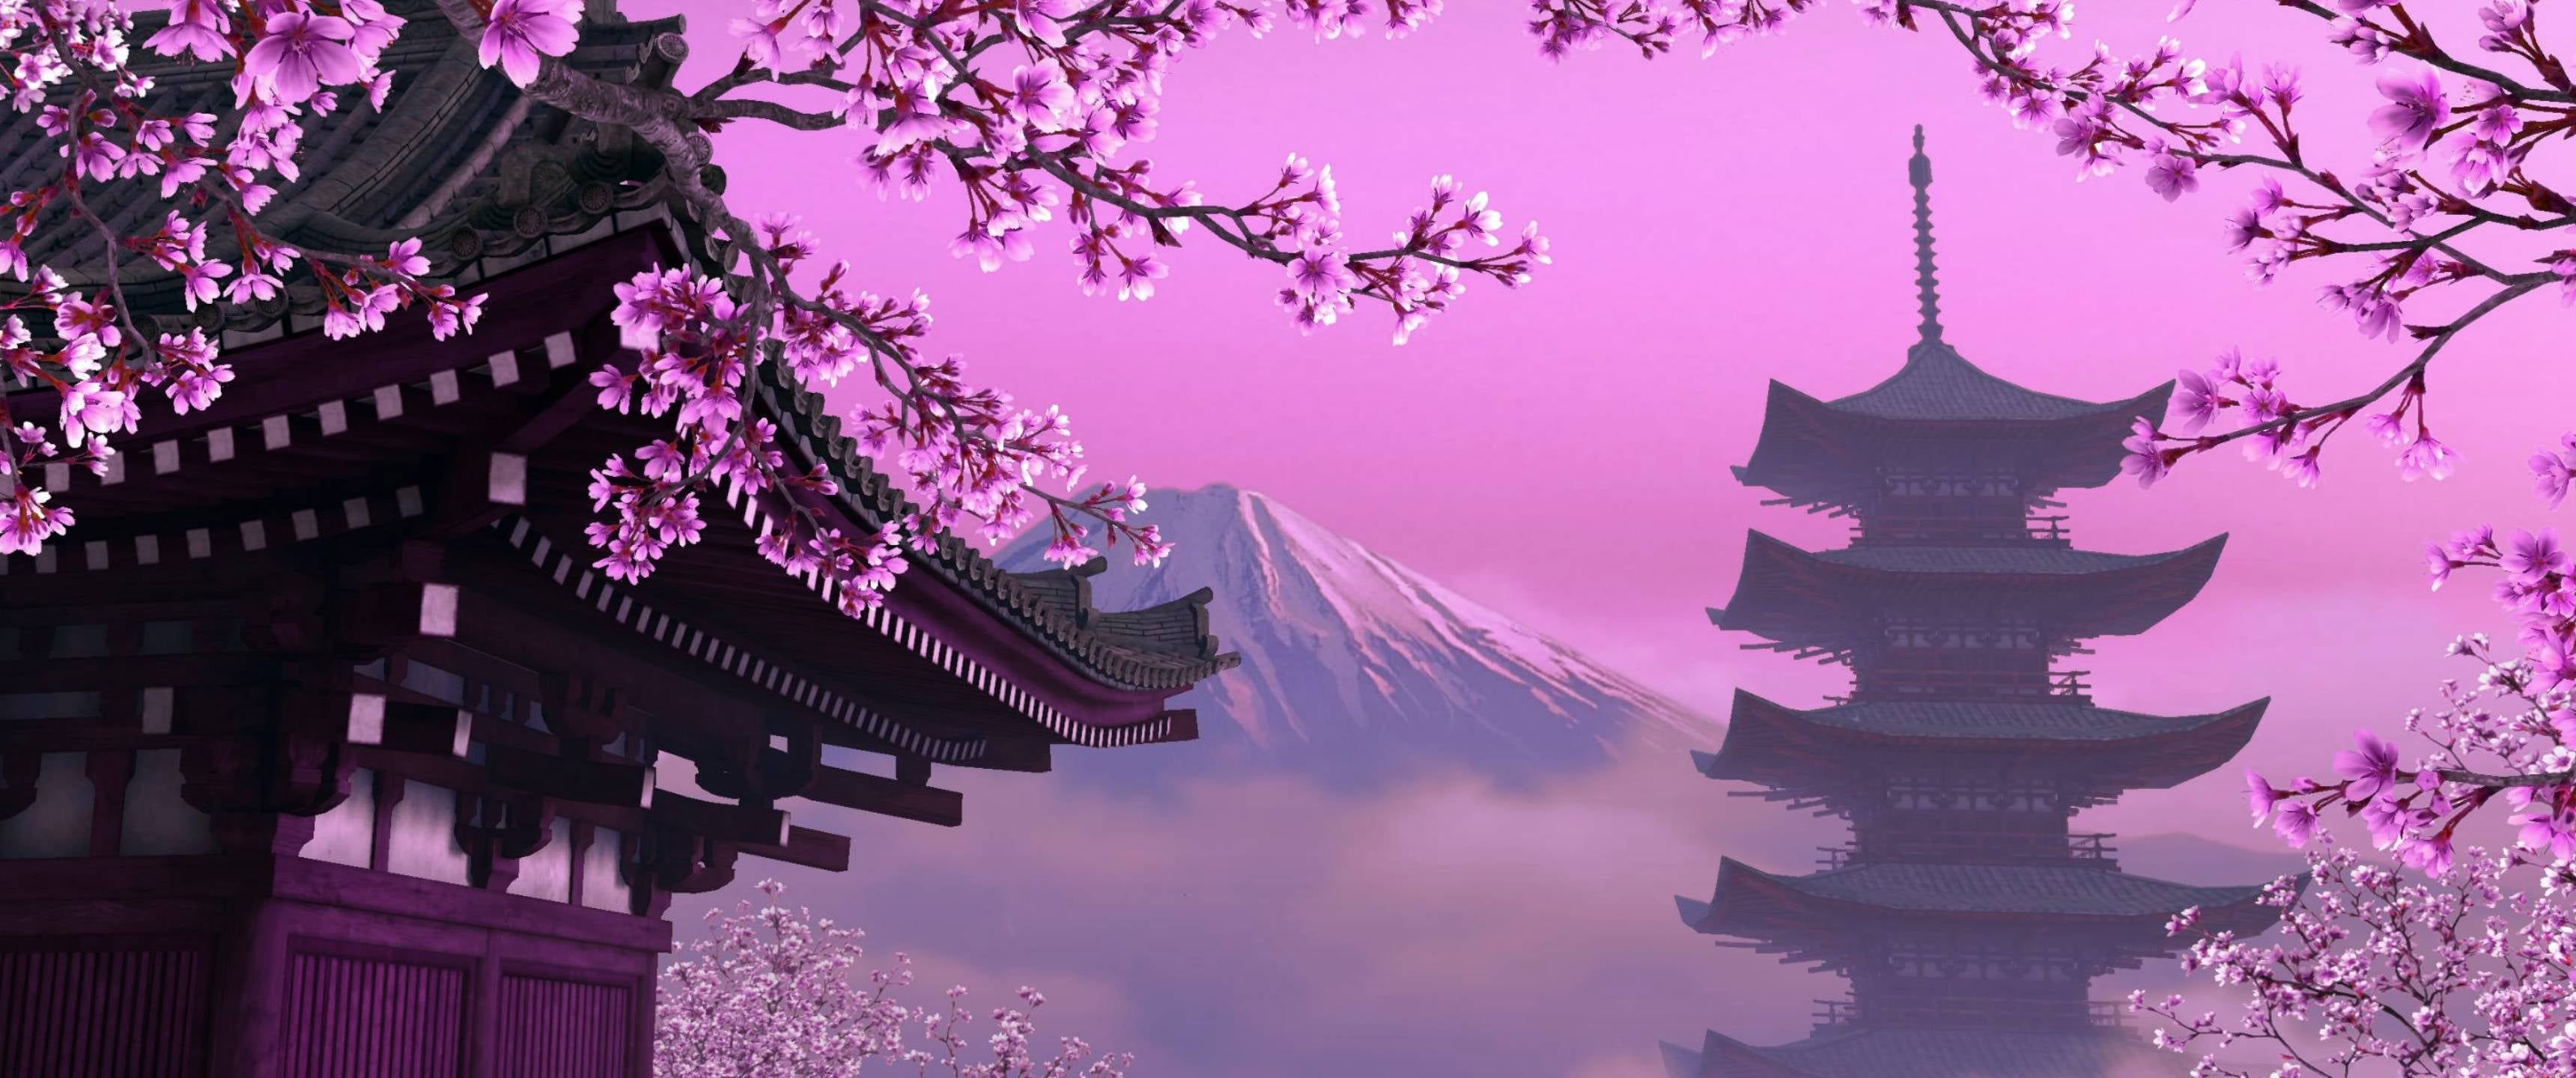 A pink and purple Japanese temple with cherry blossoms in the foreground and a mountain in the background. - 3440x1440